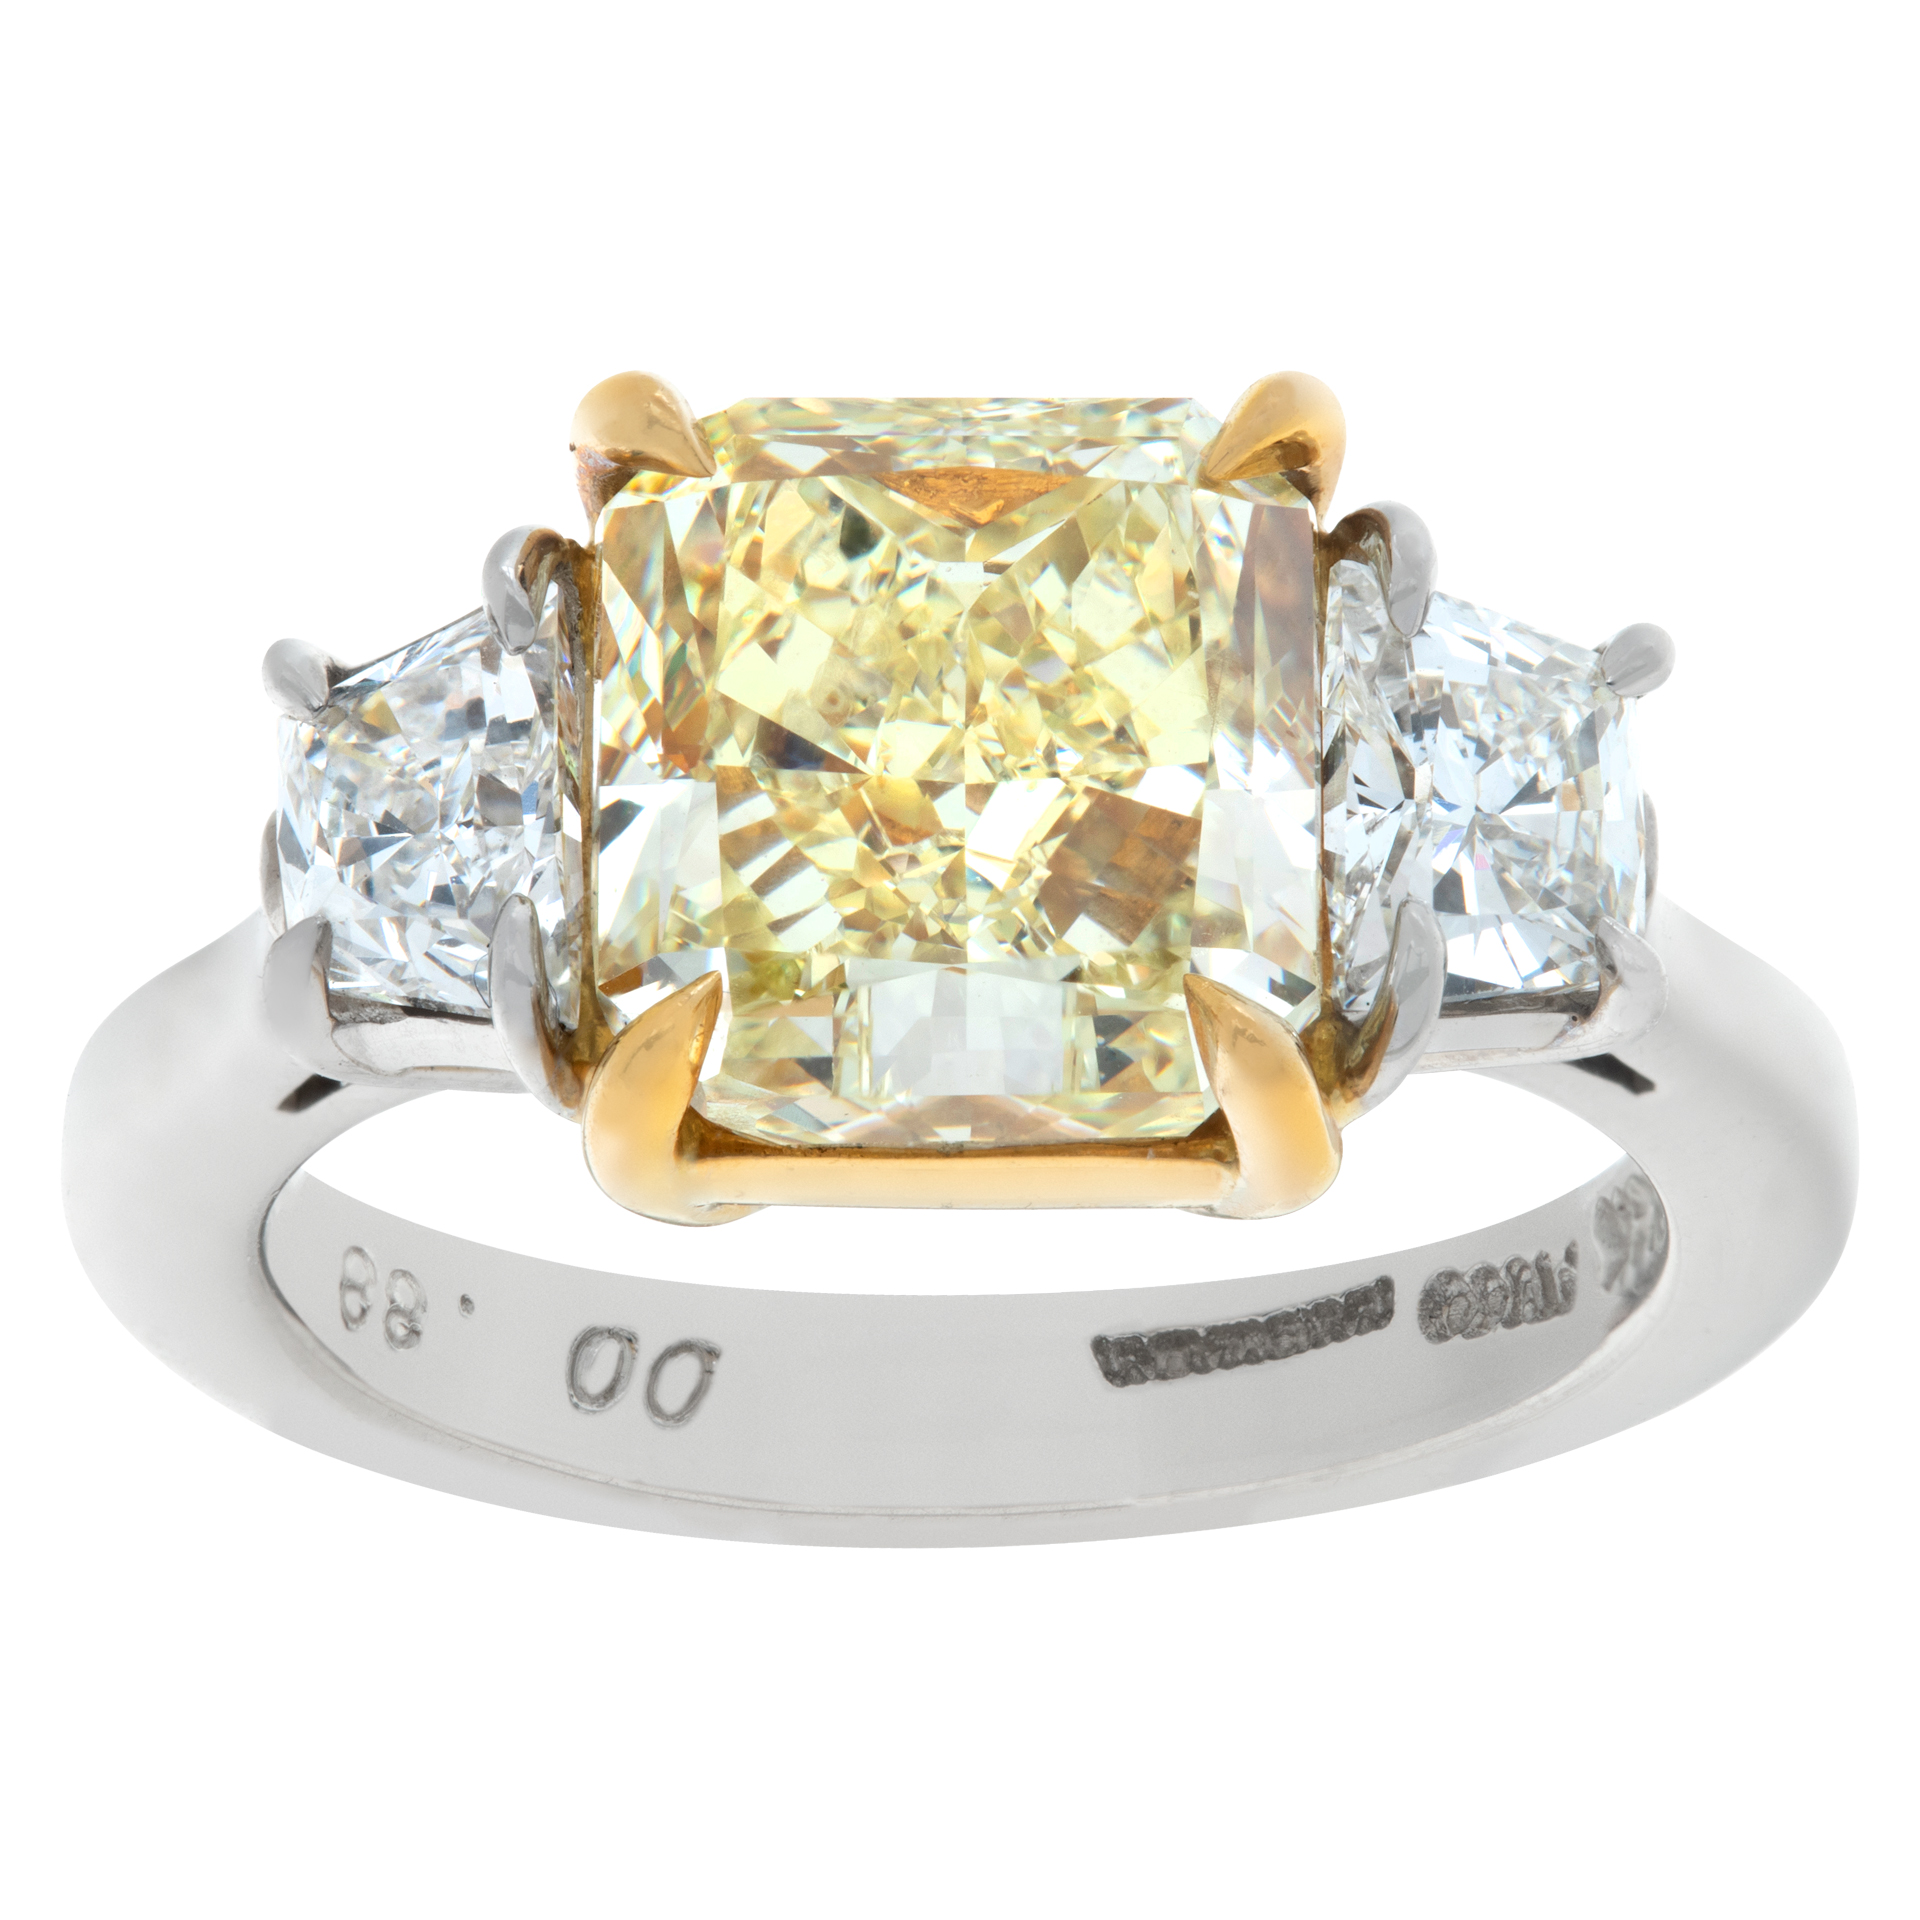 GIA certified 4.00 carat natural fancy yellow even, Cut Cornered Square Modified Brilliant Diamond, VS2 clarity, ring in platinum and 18Kt yellow gold image 1